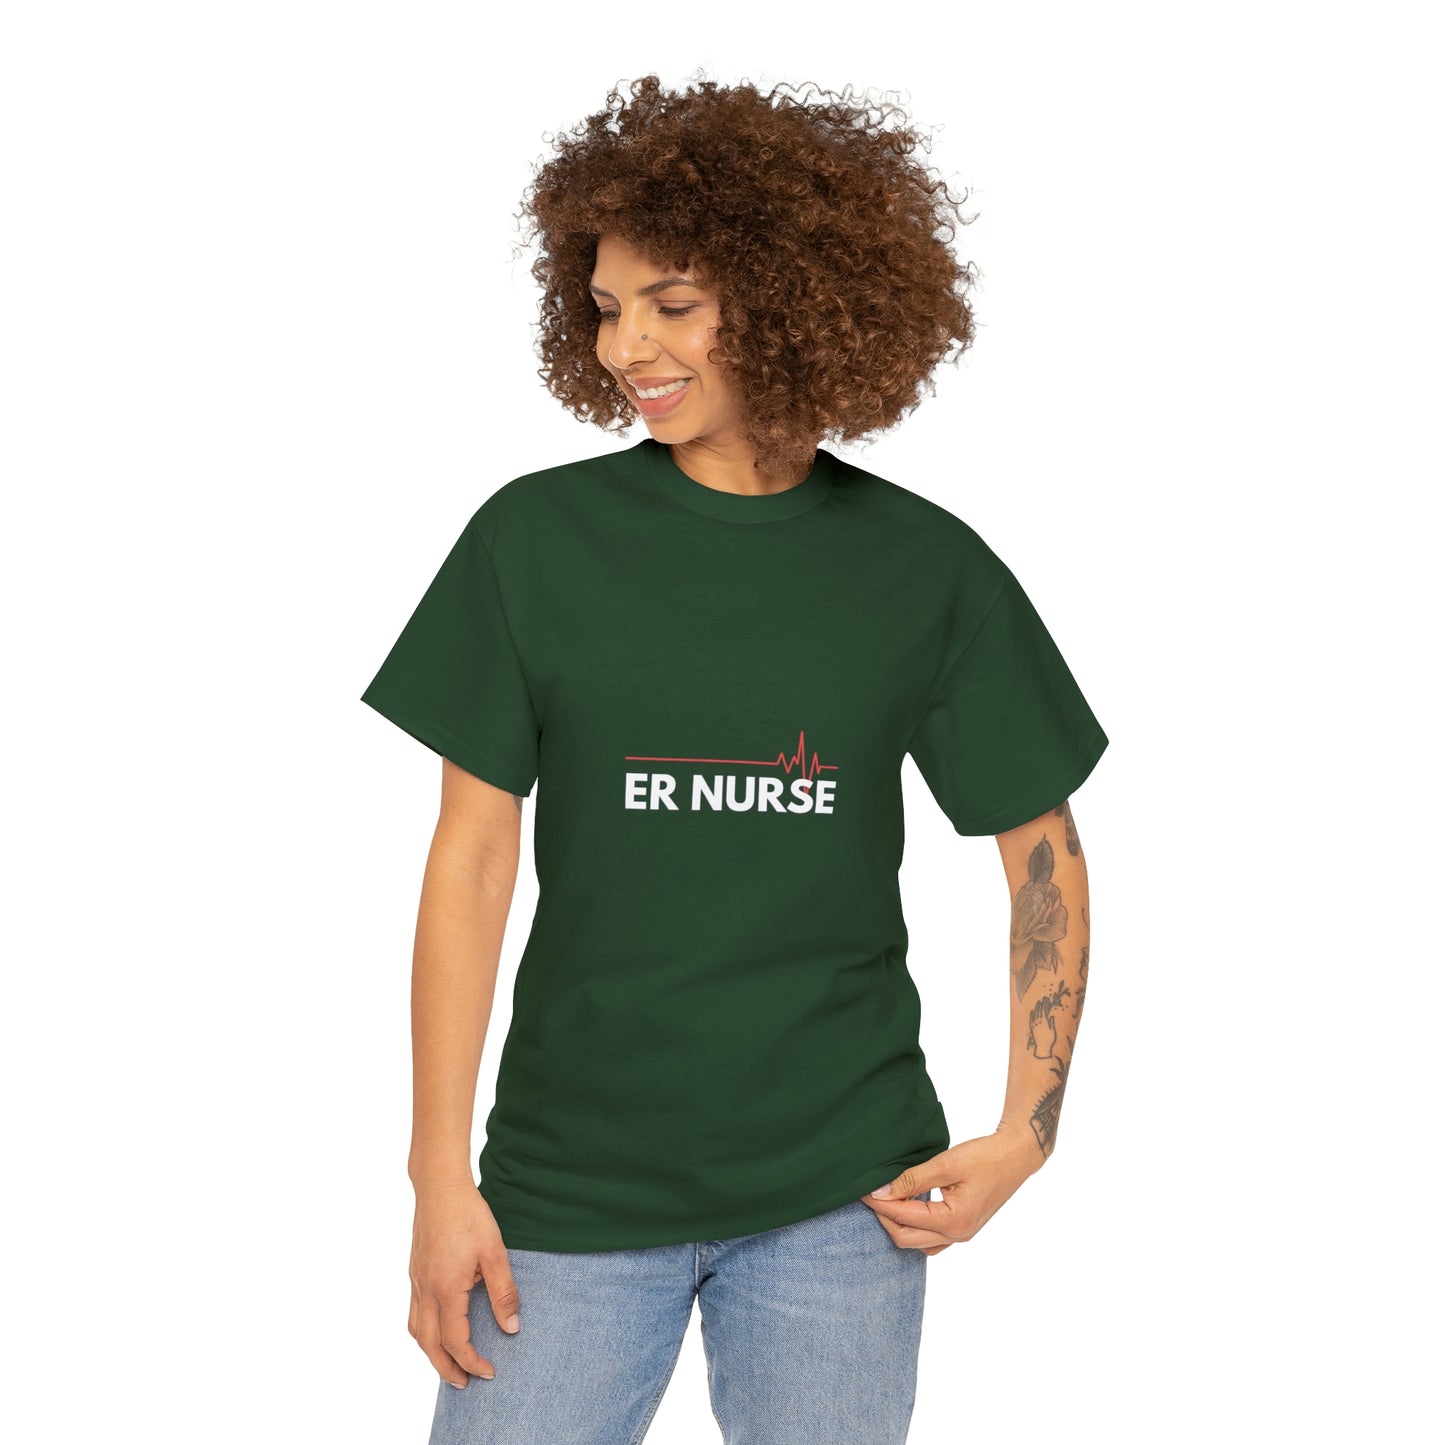 ER Nurse Your Style Our Custom Printed Tee Unique Design Comfortable Fit Personalized for You color, funny tshirt tee shirt motivation